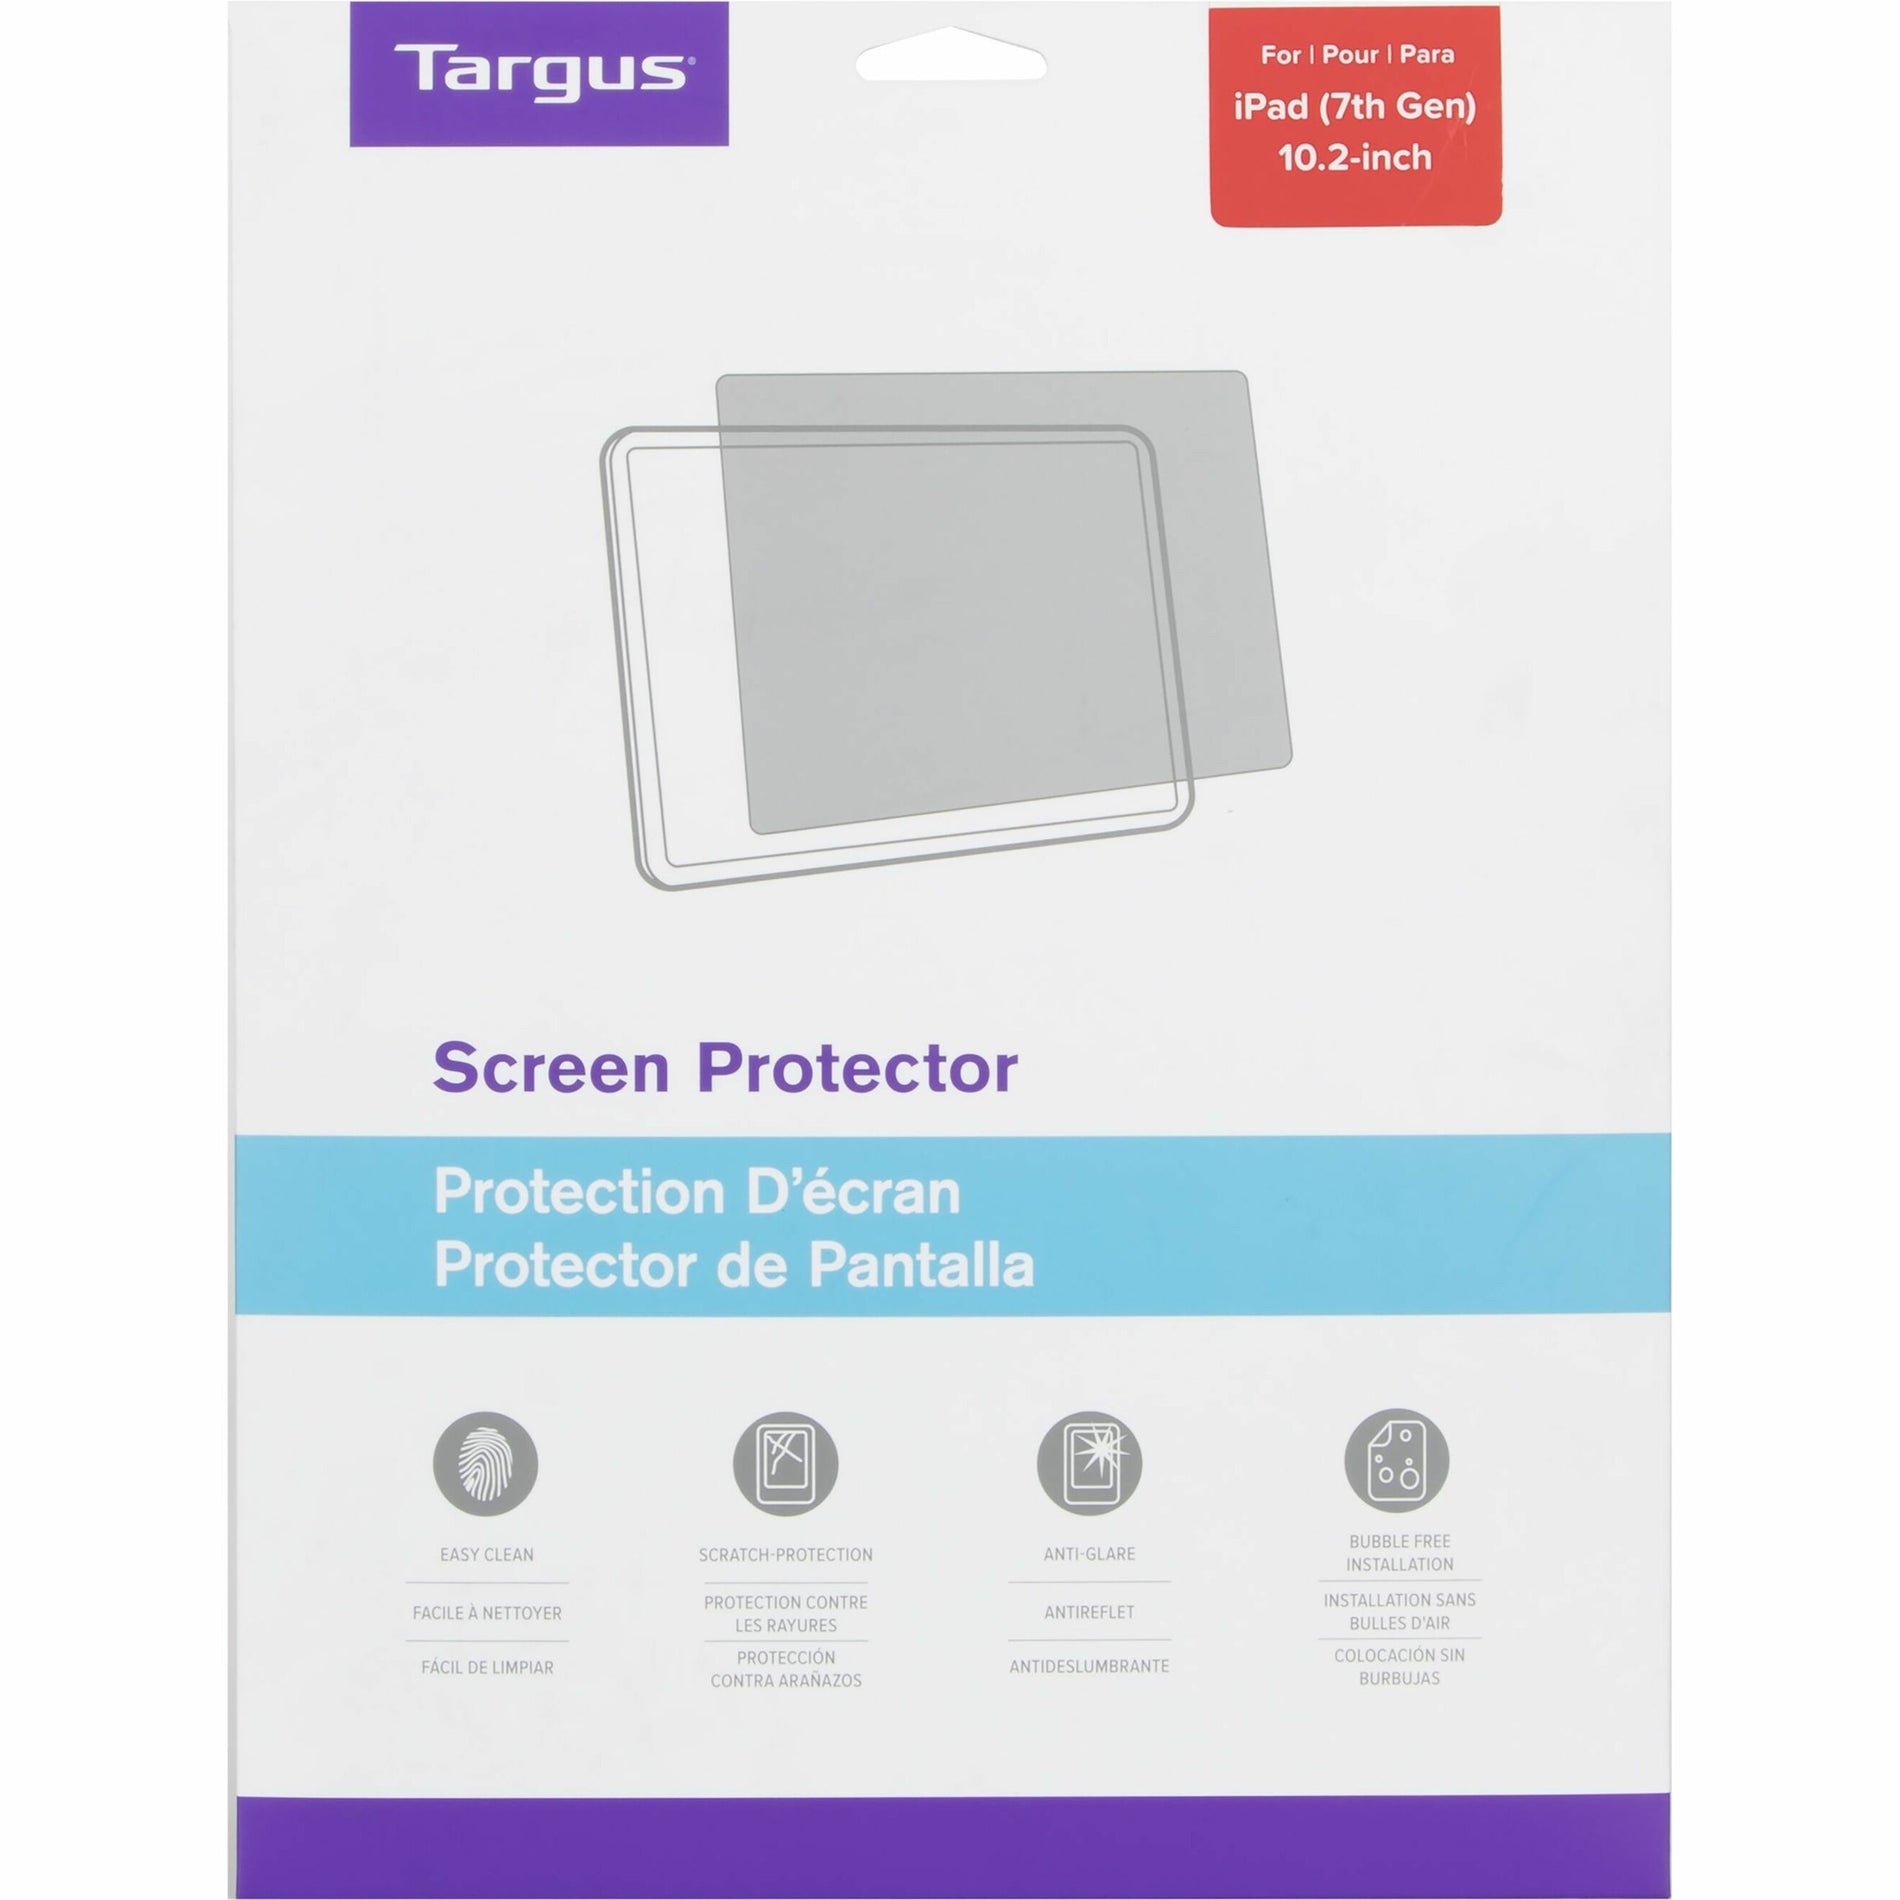 Targus AWV102GL Scratch-Resistant Screen Protector for iPad (7th gen.) 10.2-inch, Optical Clarity, Bubble-free, Anti-glare